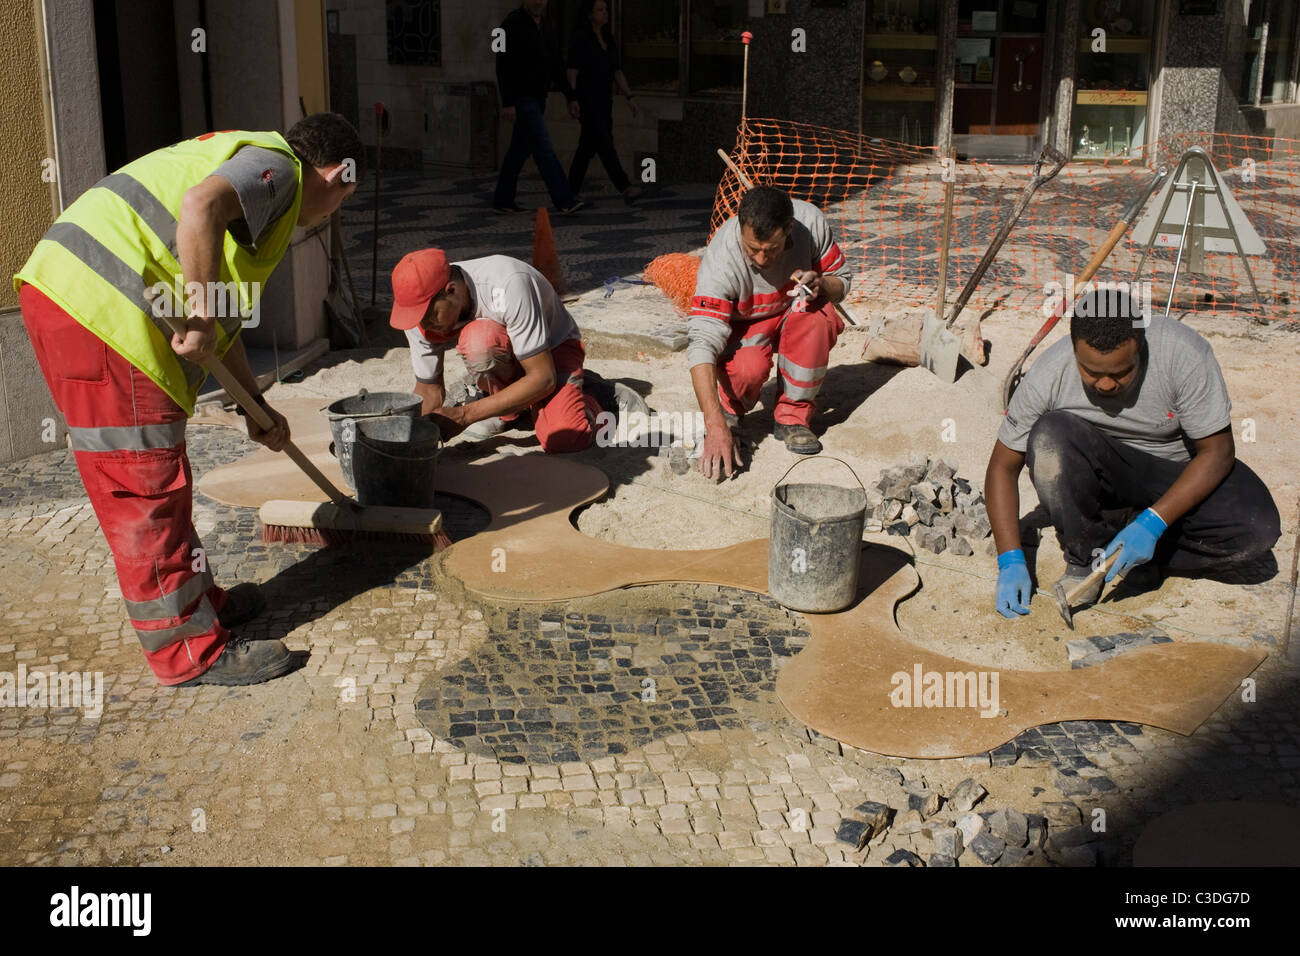 Workers repairing calcadas in Cascais, Portugal Stock Photo